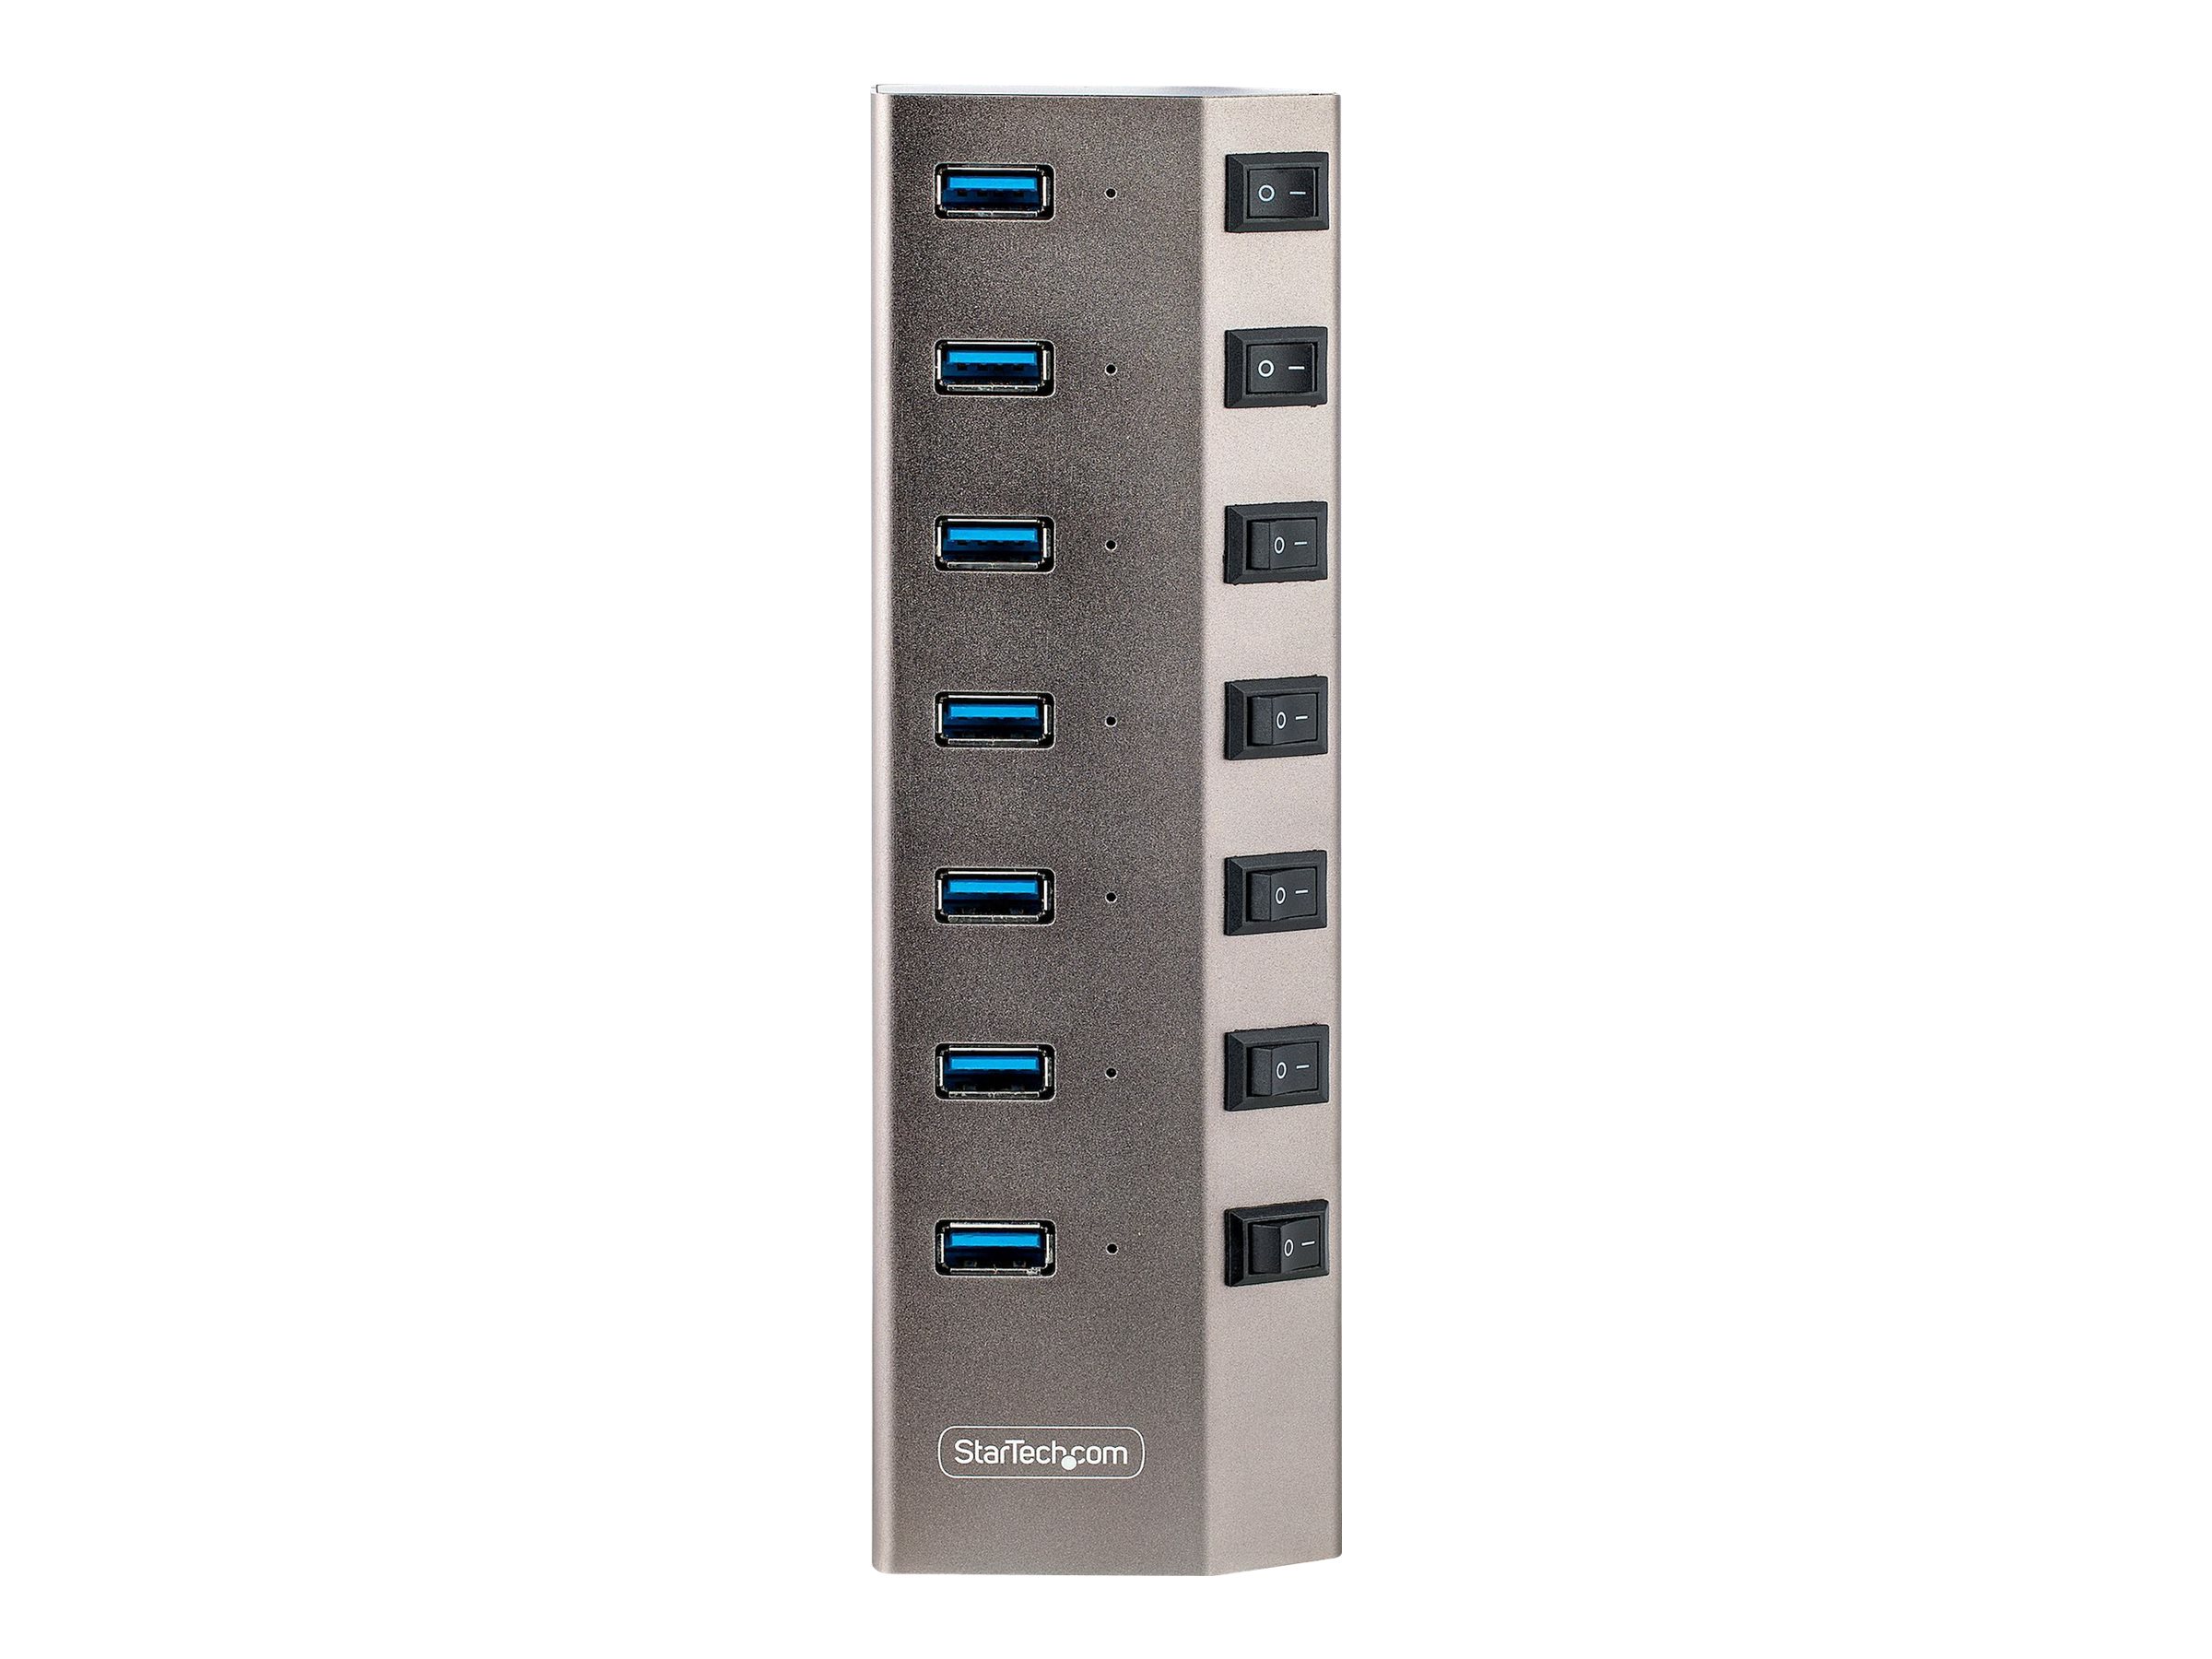 StarTech.com 7-Port Self-Powered USB-C Hub with Individual On/Off Switches, USB 3.0 5Gbps Expansion Hub w/Power Supply, Desktop/Laptop USB-C to USB-A Hub, 7x BC 1.2 (1.5A)